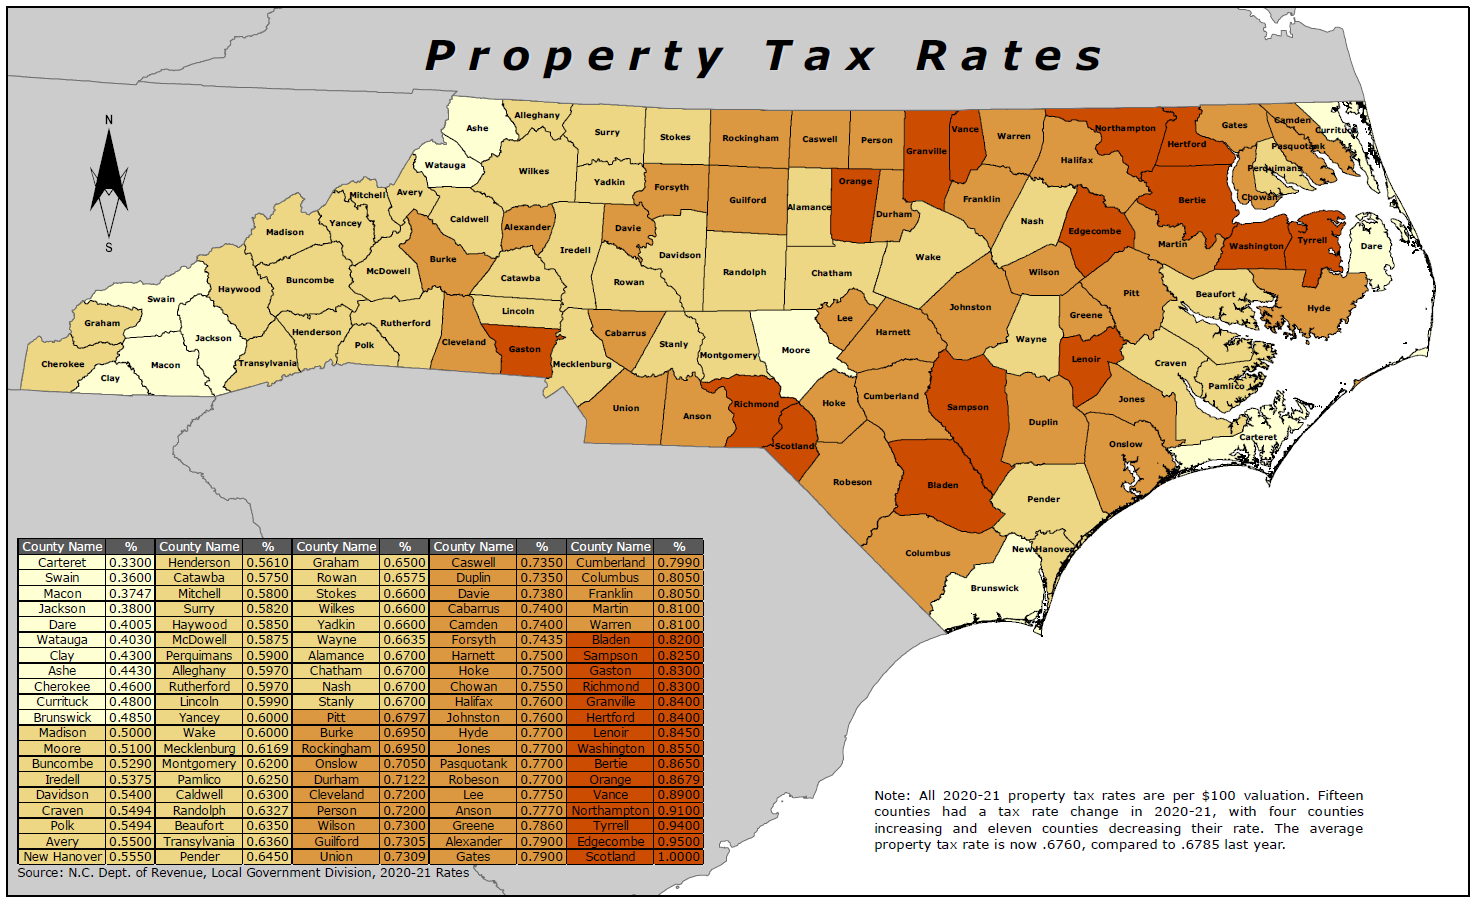 Property Tax bills are just plain confusing